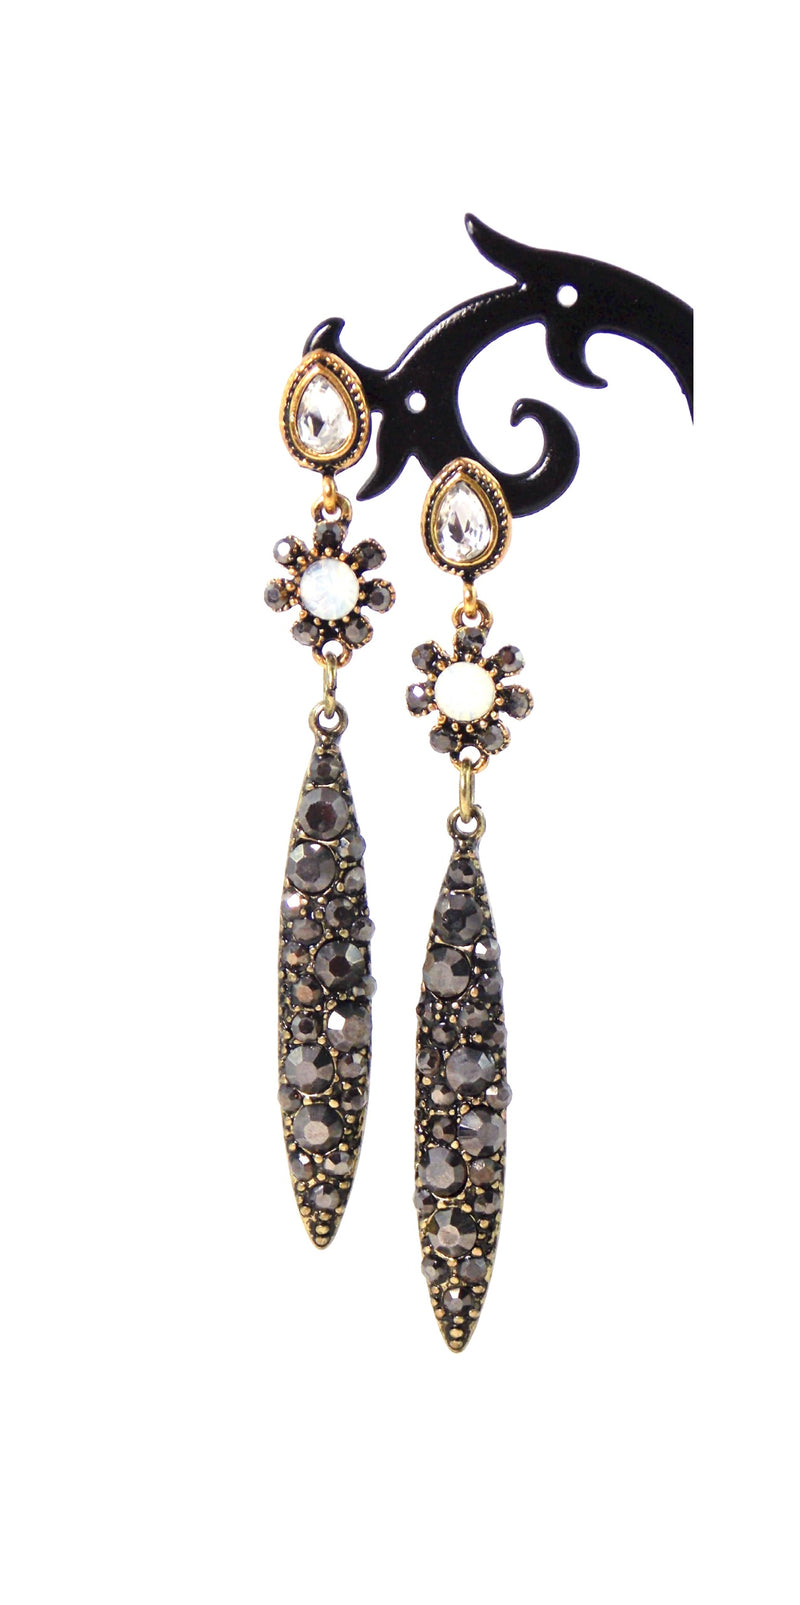 Black And Gold Flower Crystal Statement Earrings